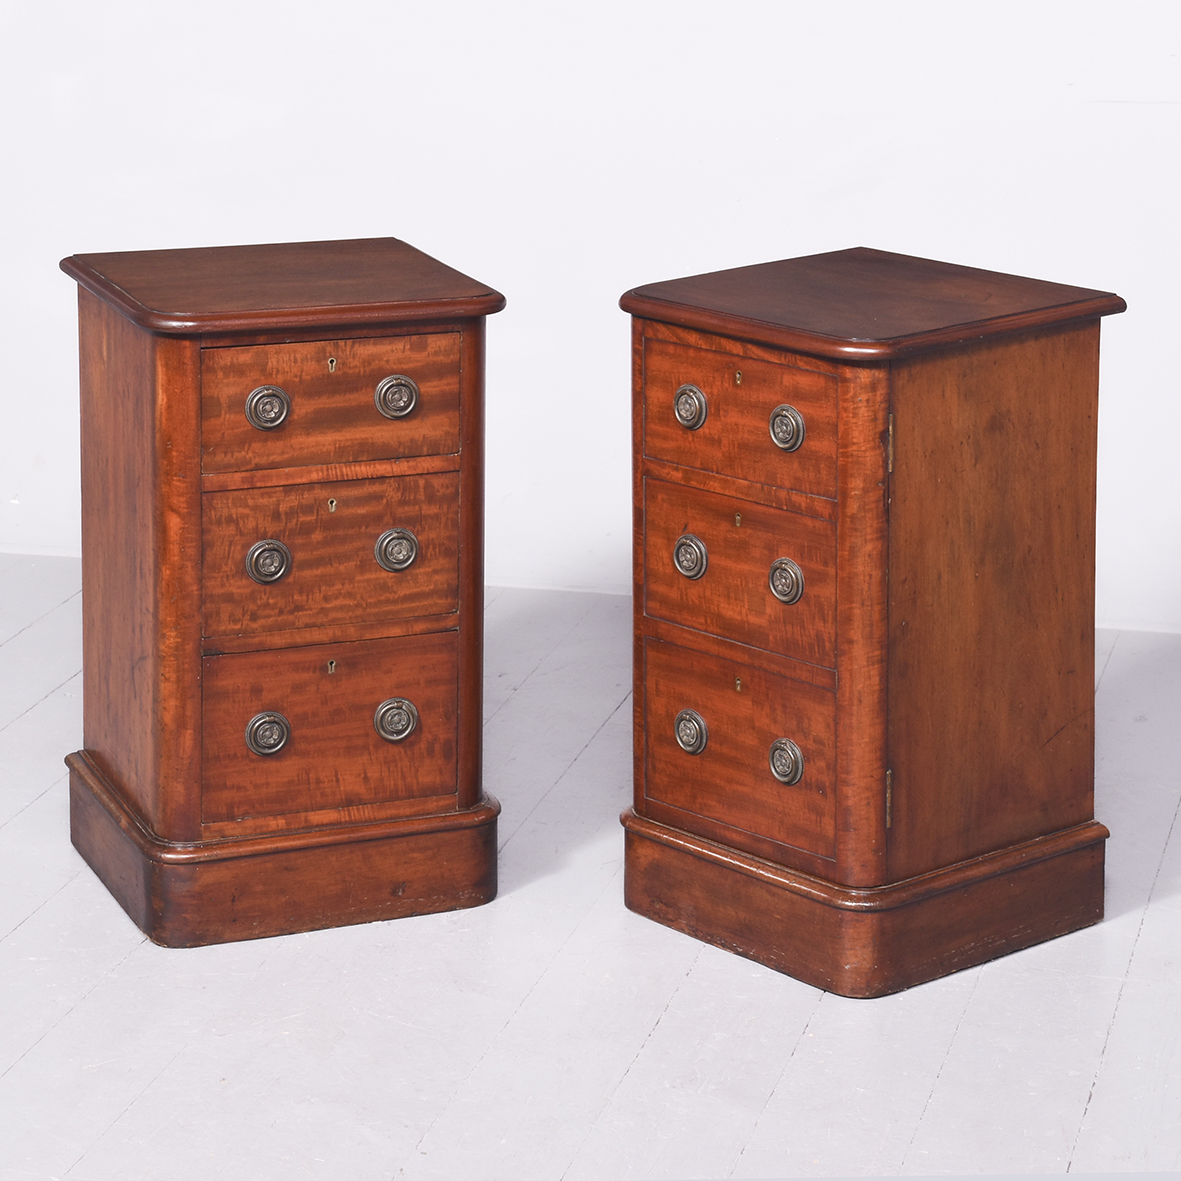 Pair of Victorian Figured Mahogany Bedside Lockers bedside cabinets Antique Cabinets